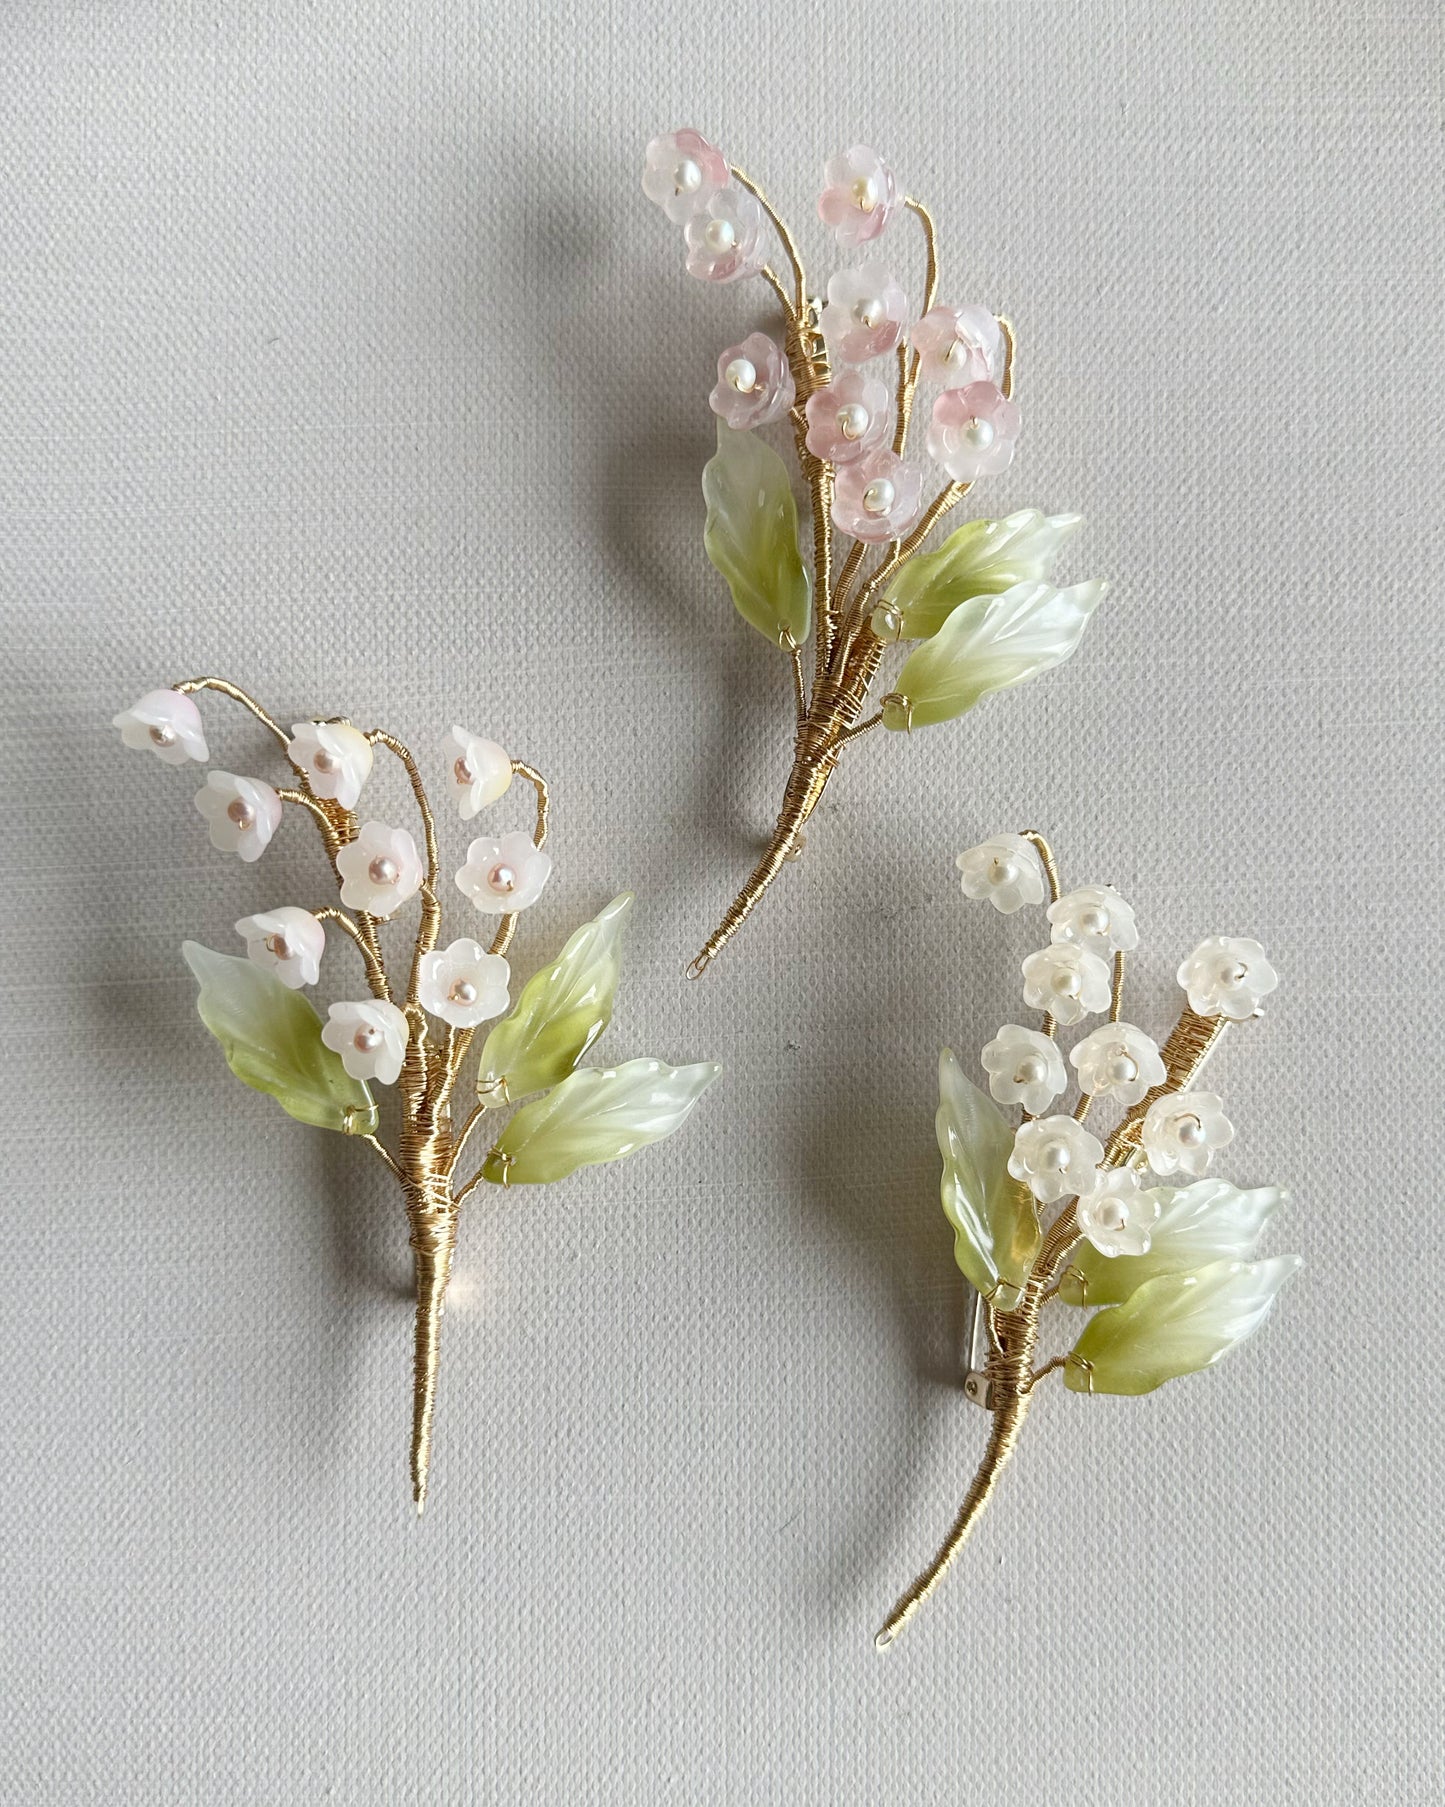 Lily of the valley brooch in pink and lemon sherbet